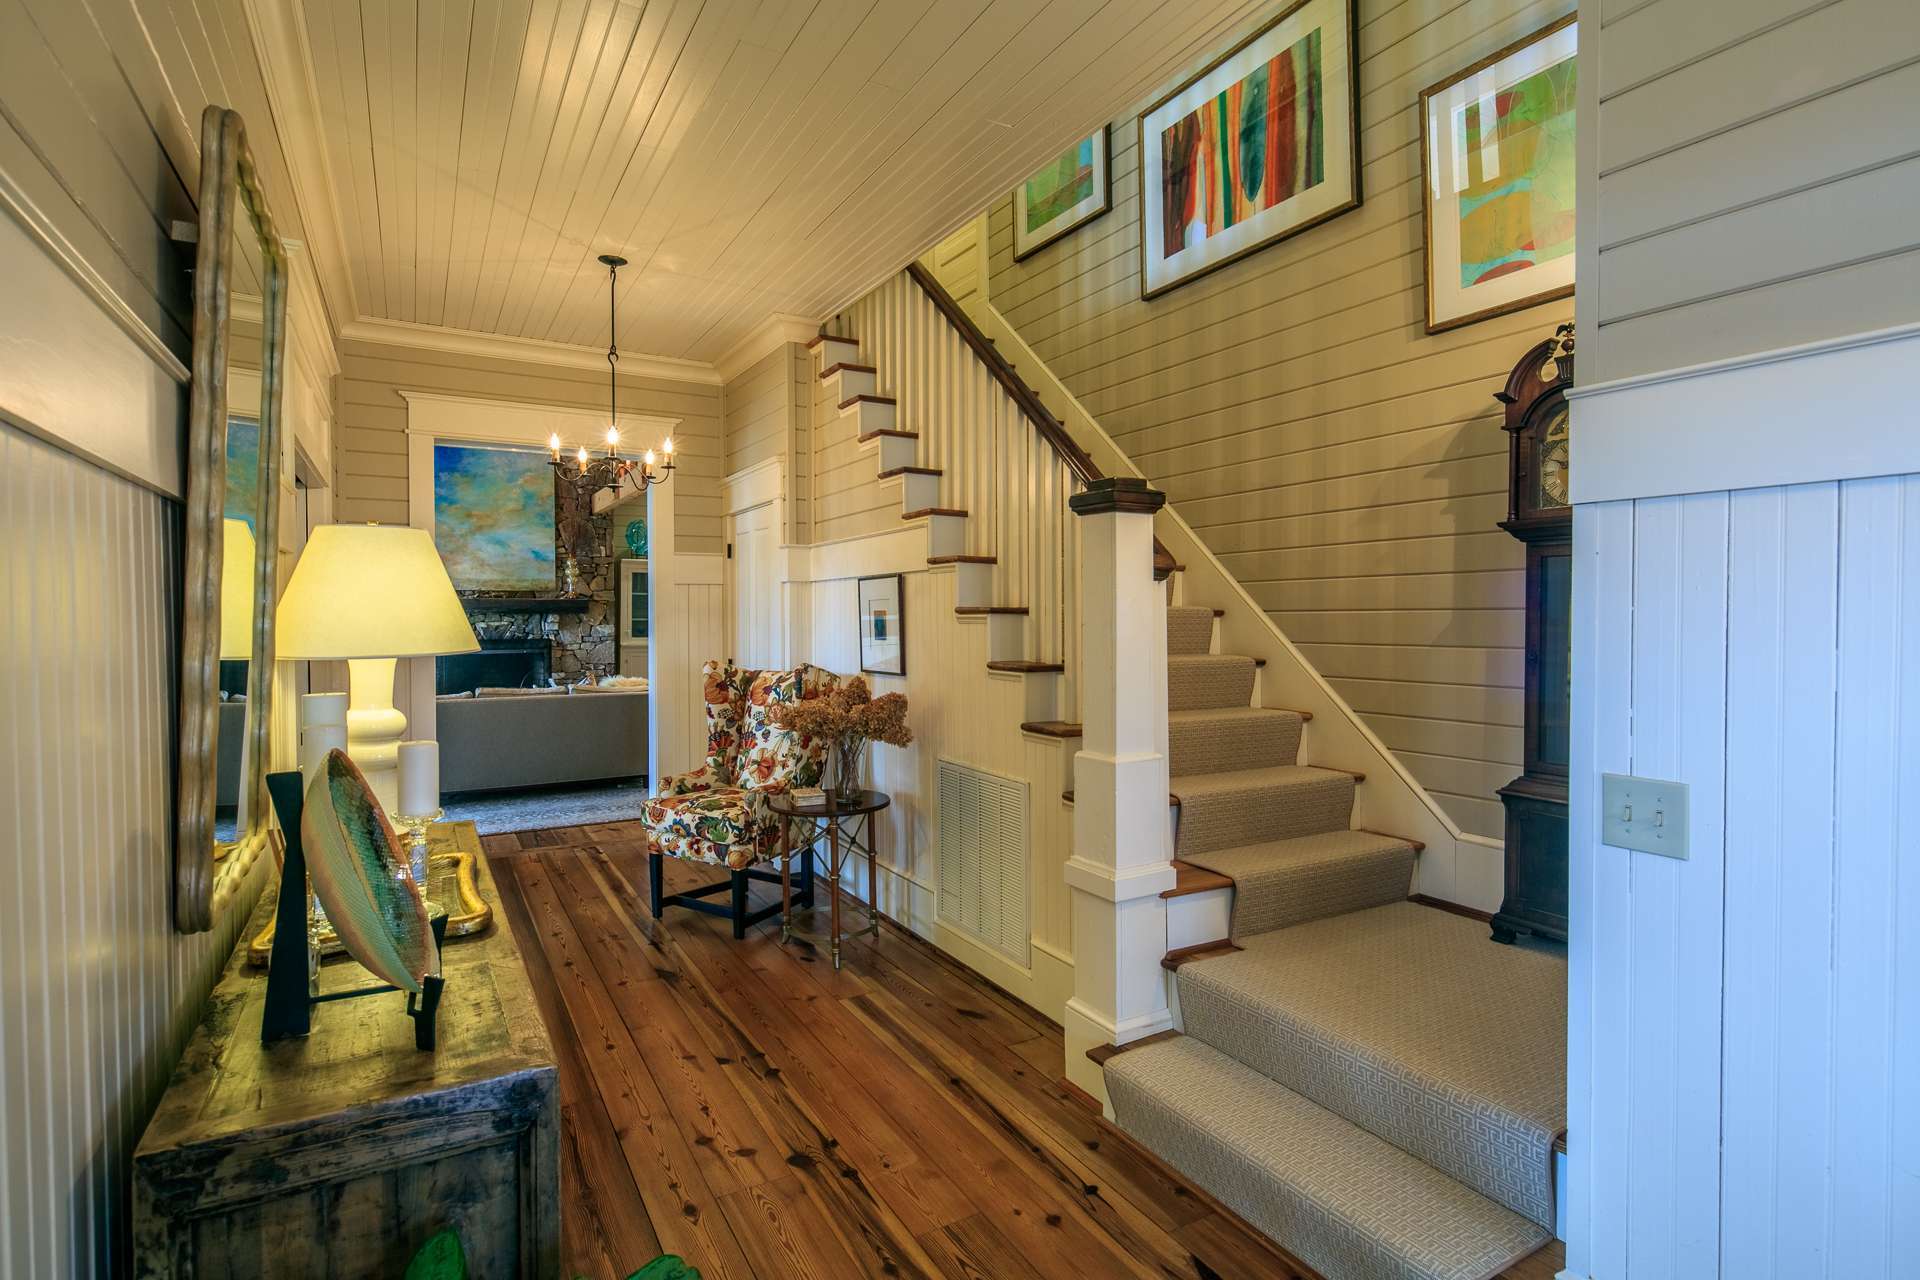 From the front entry foyer, stairs lead to the upper level where you will find two guest bedrooms and two full baths.